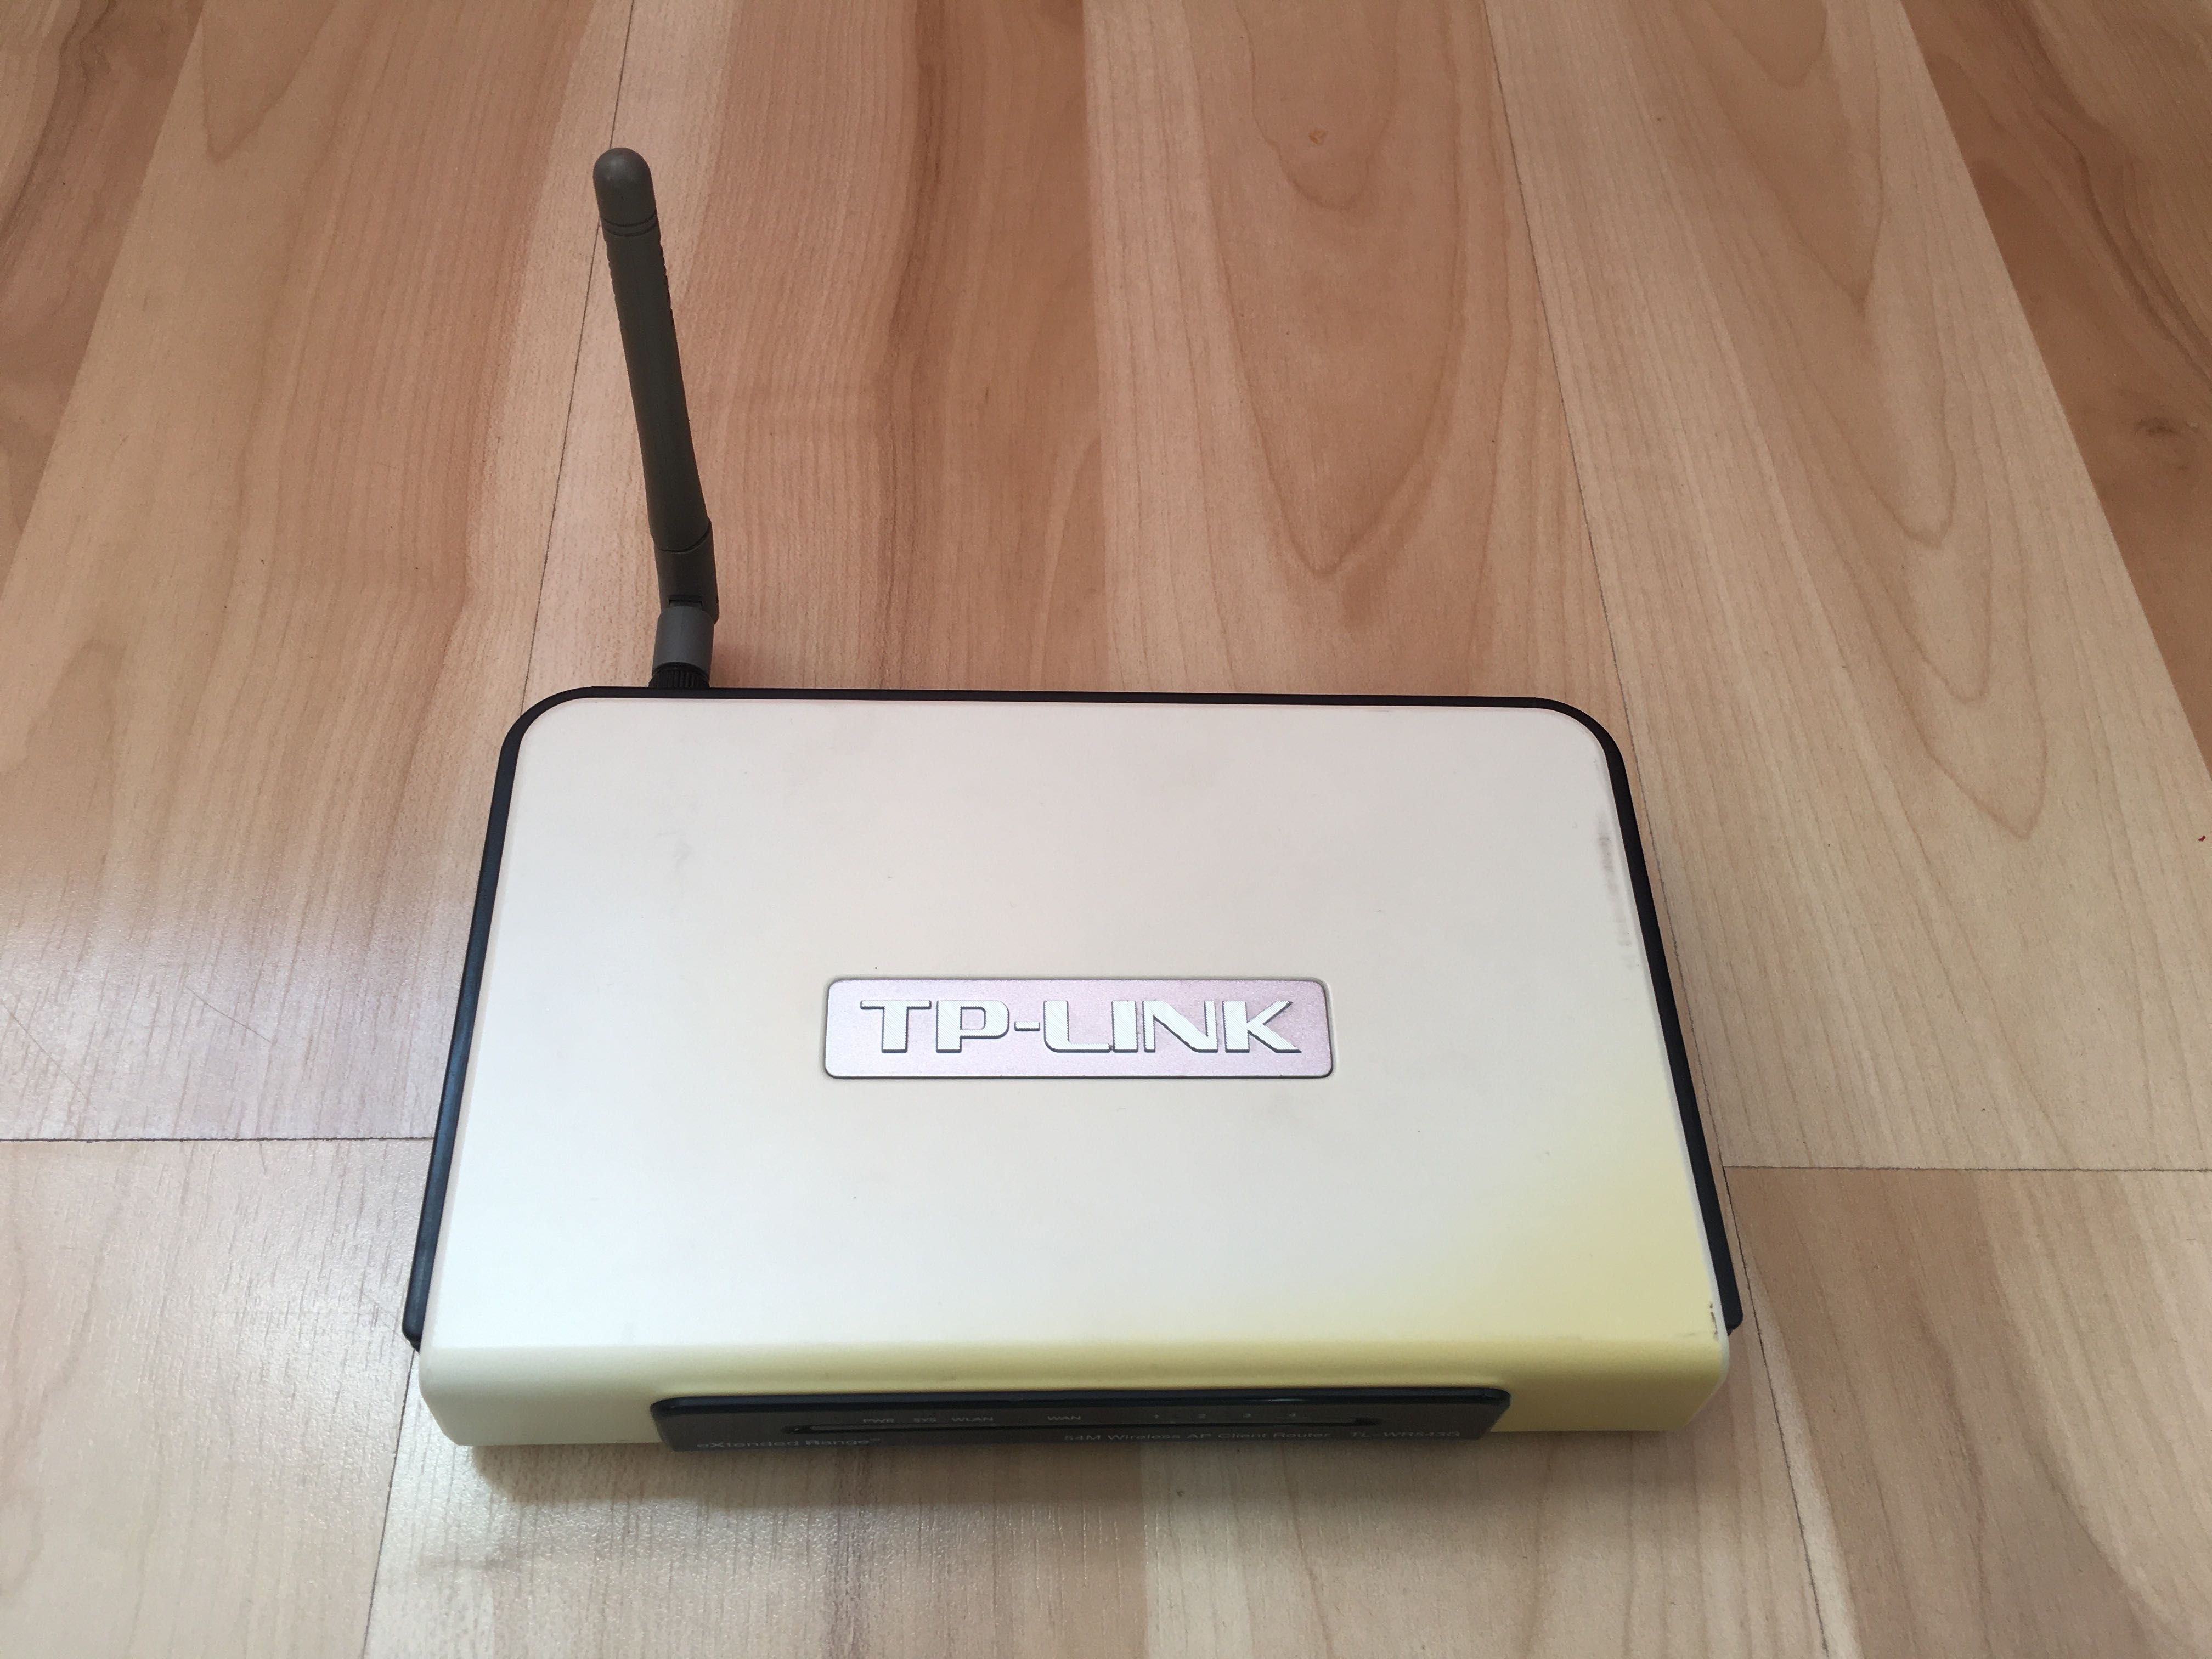 TP-Link router DSL Wi-Fi 54Mb/s TL-WR543G